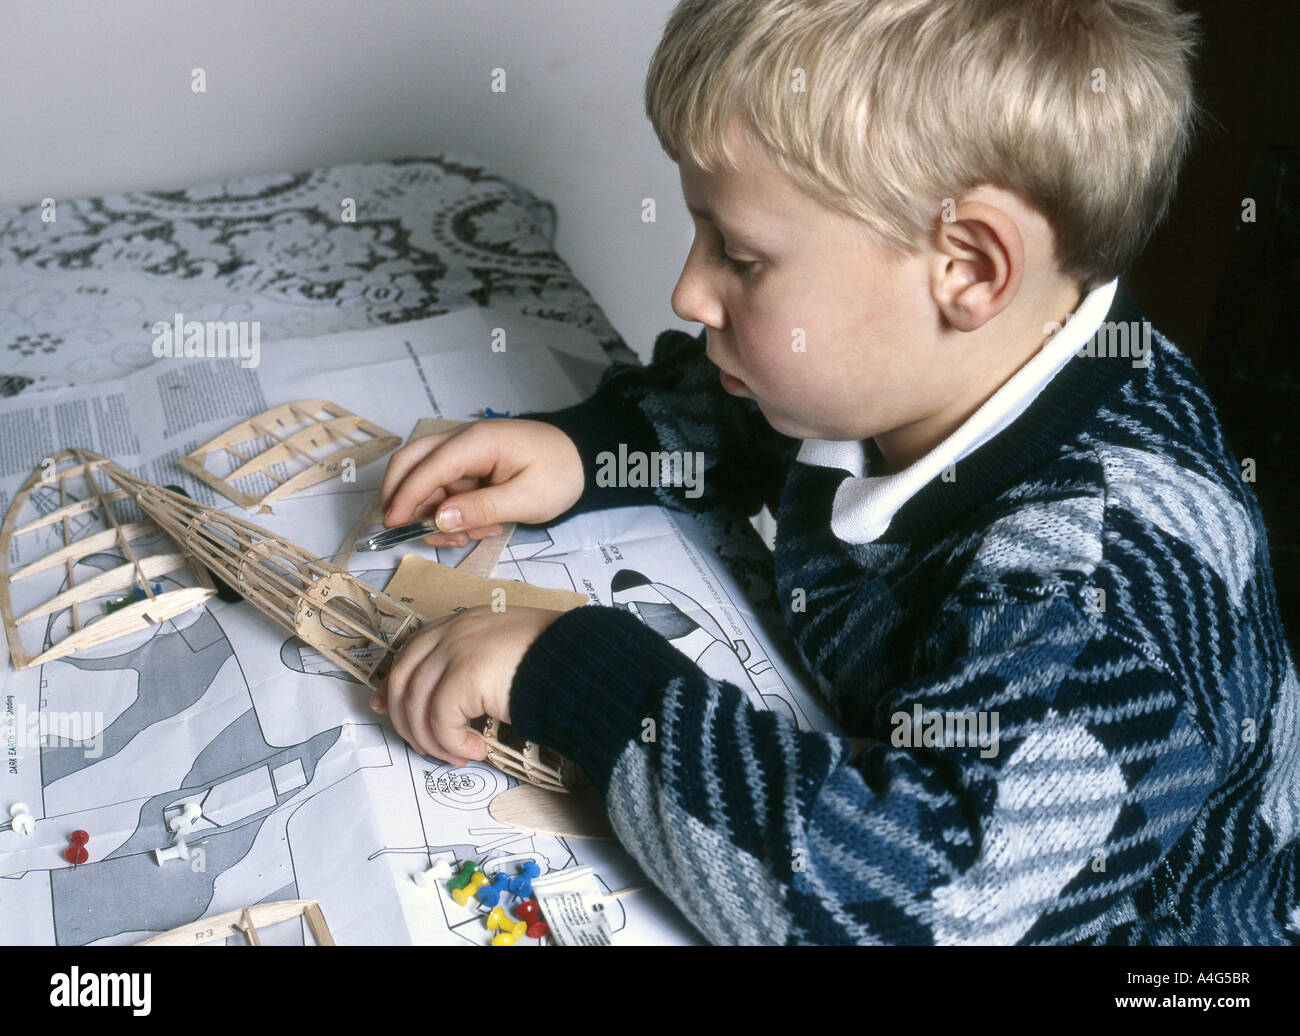 Young boy working on balsa wood flying model of classic Spitfire fighter aircraft. Stock Photo